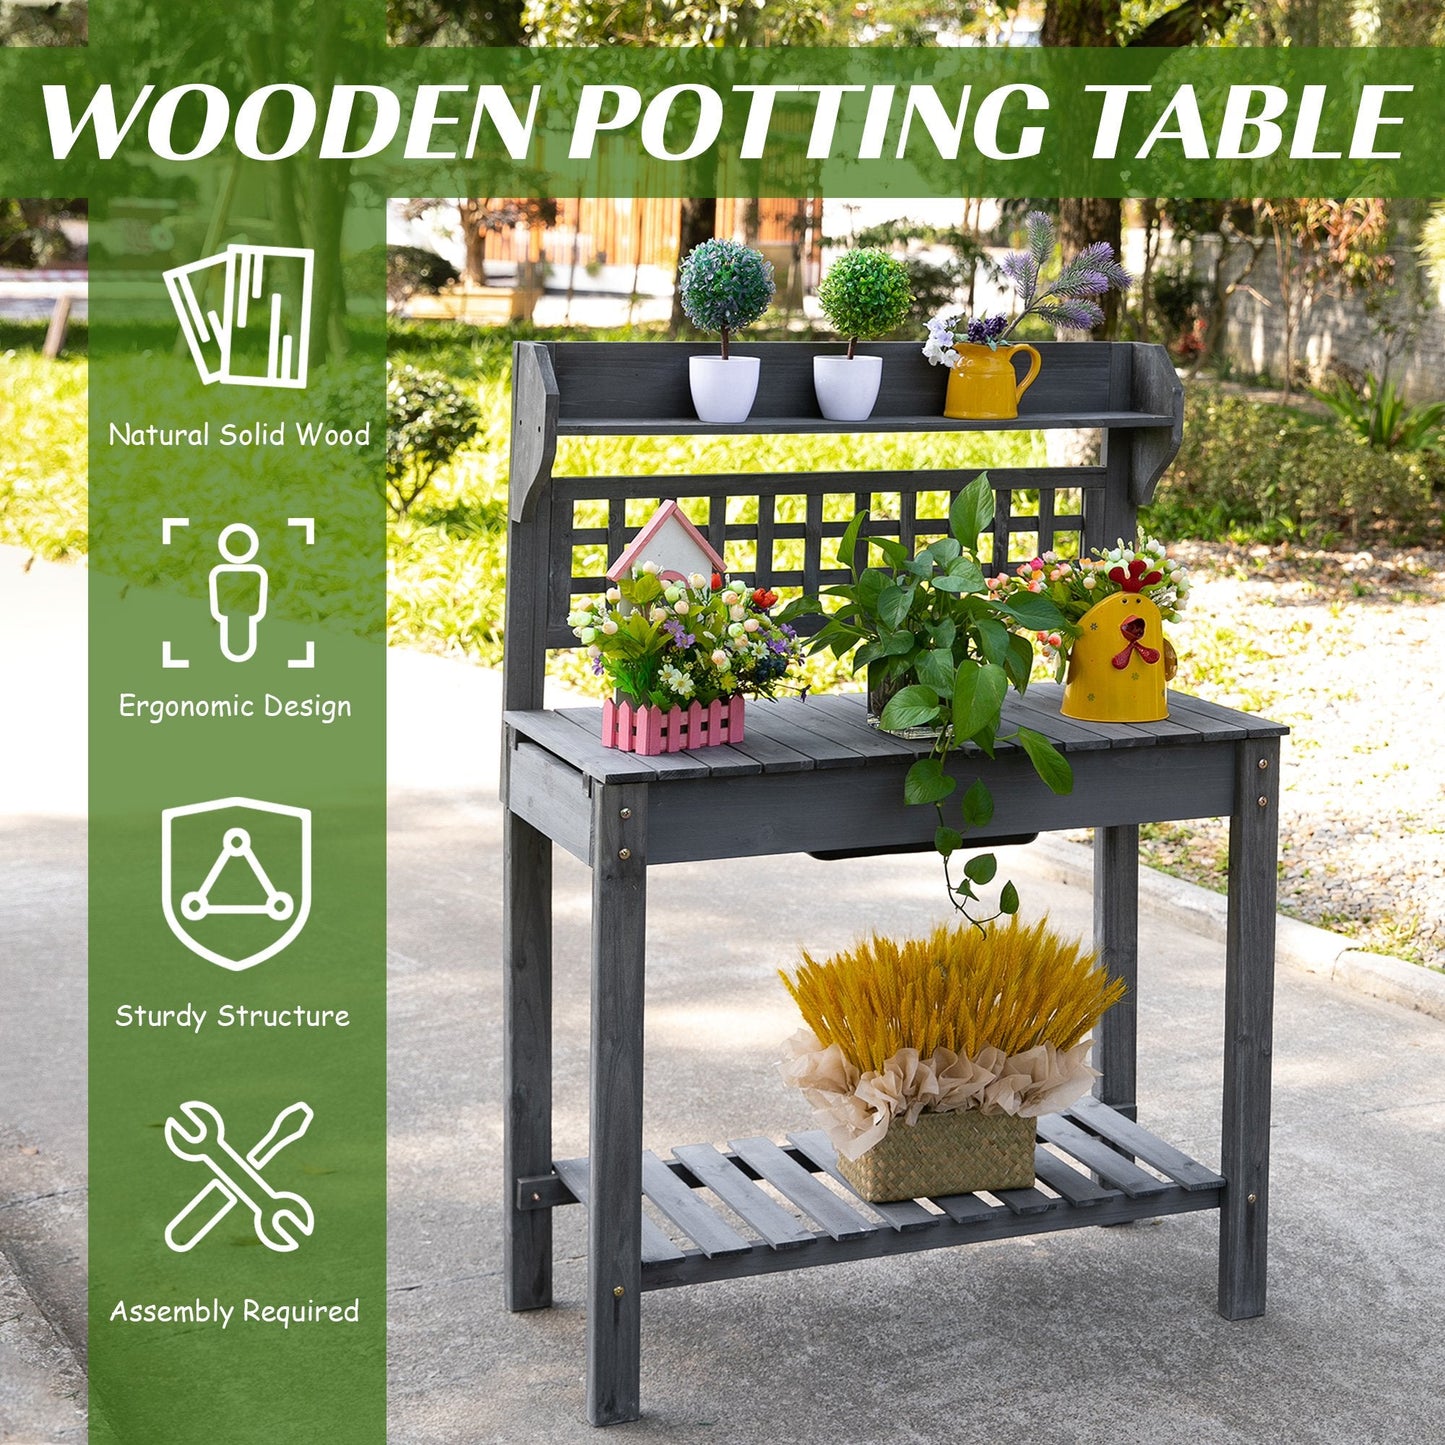 -Outsunny 39'' Wooden Garden Potting Bench Work Table with Hidden Storage, Sliding Tabletop, Below Clapboard, Upper Shelf, Grey - Outdoor Style Company